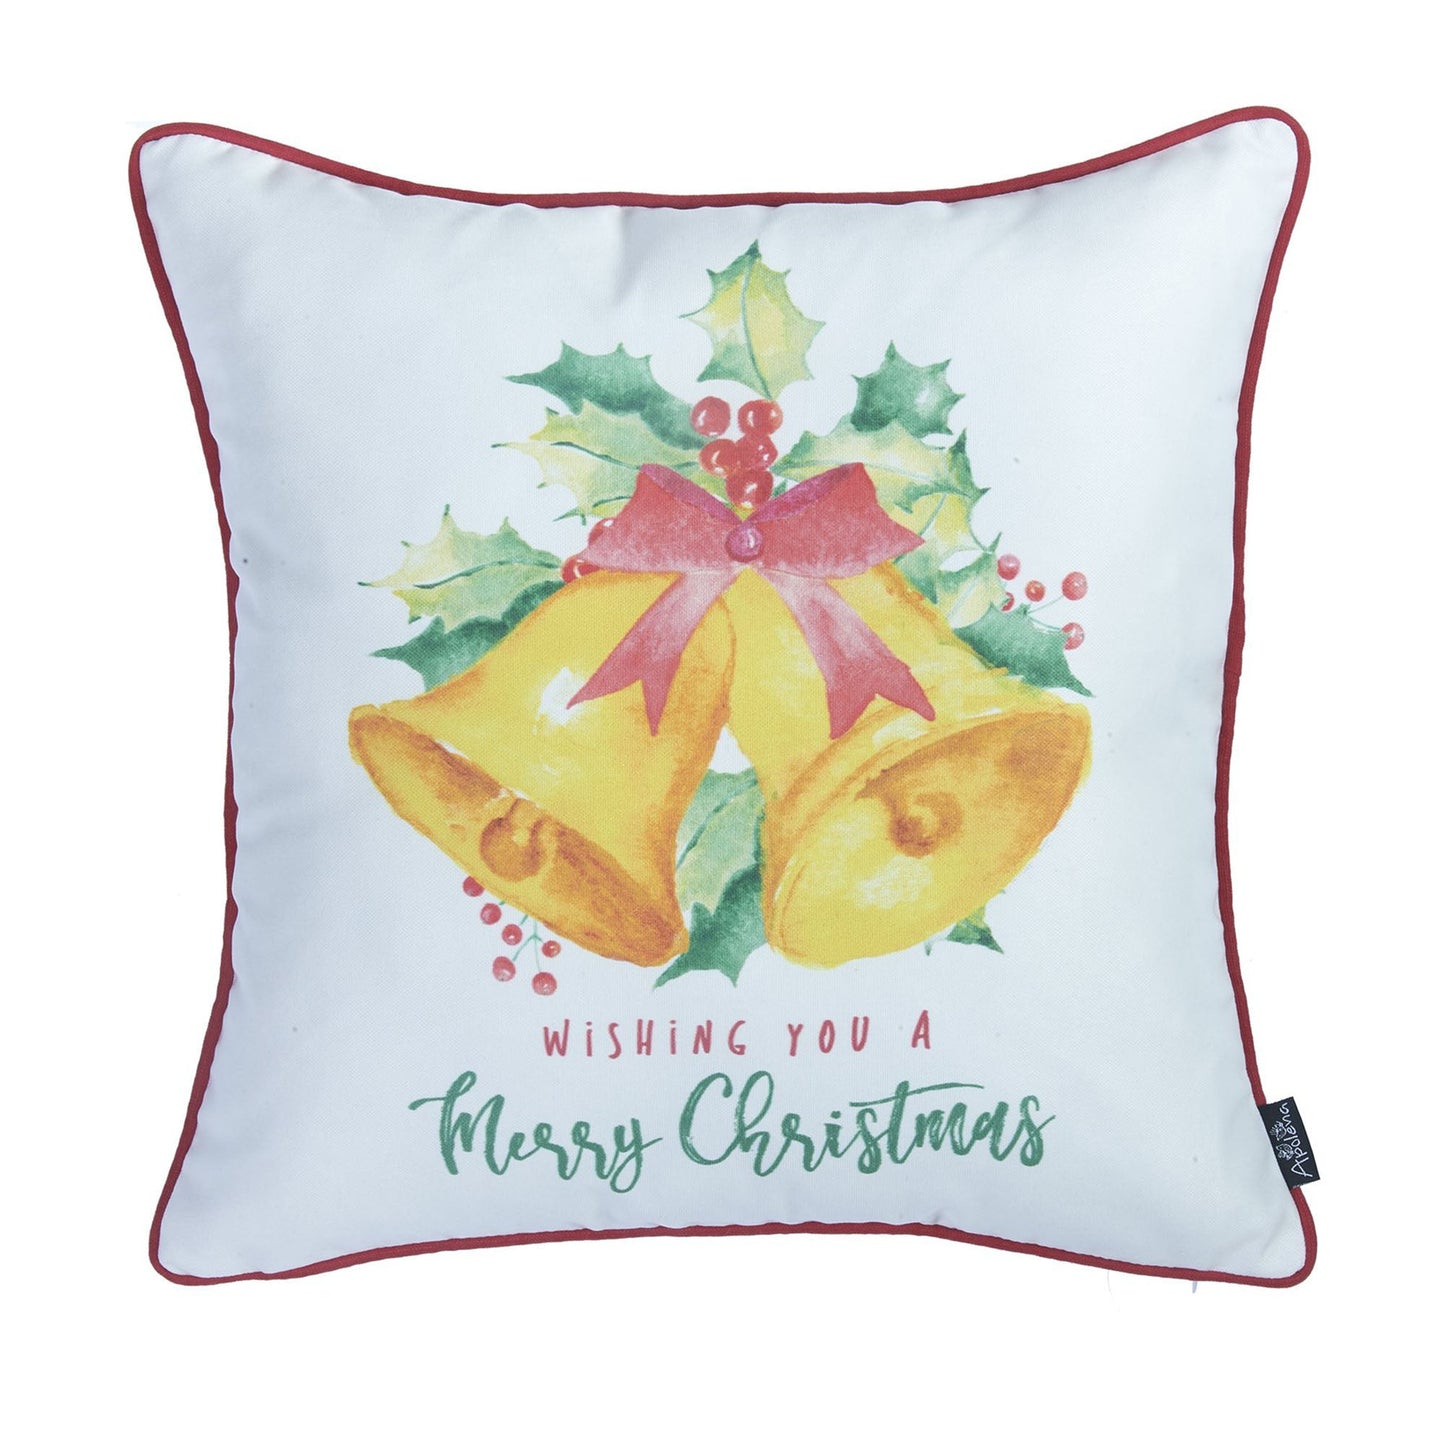 Christmas Bells Decorative Single Throw Pillow 18" x 18" White & Yellow Square for Couch, Bedding